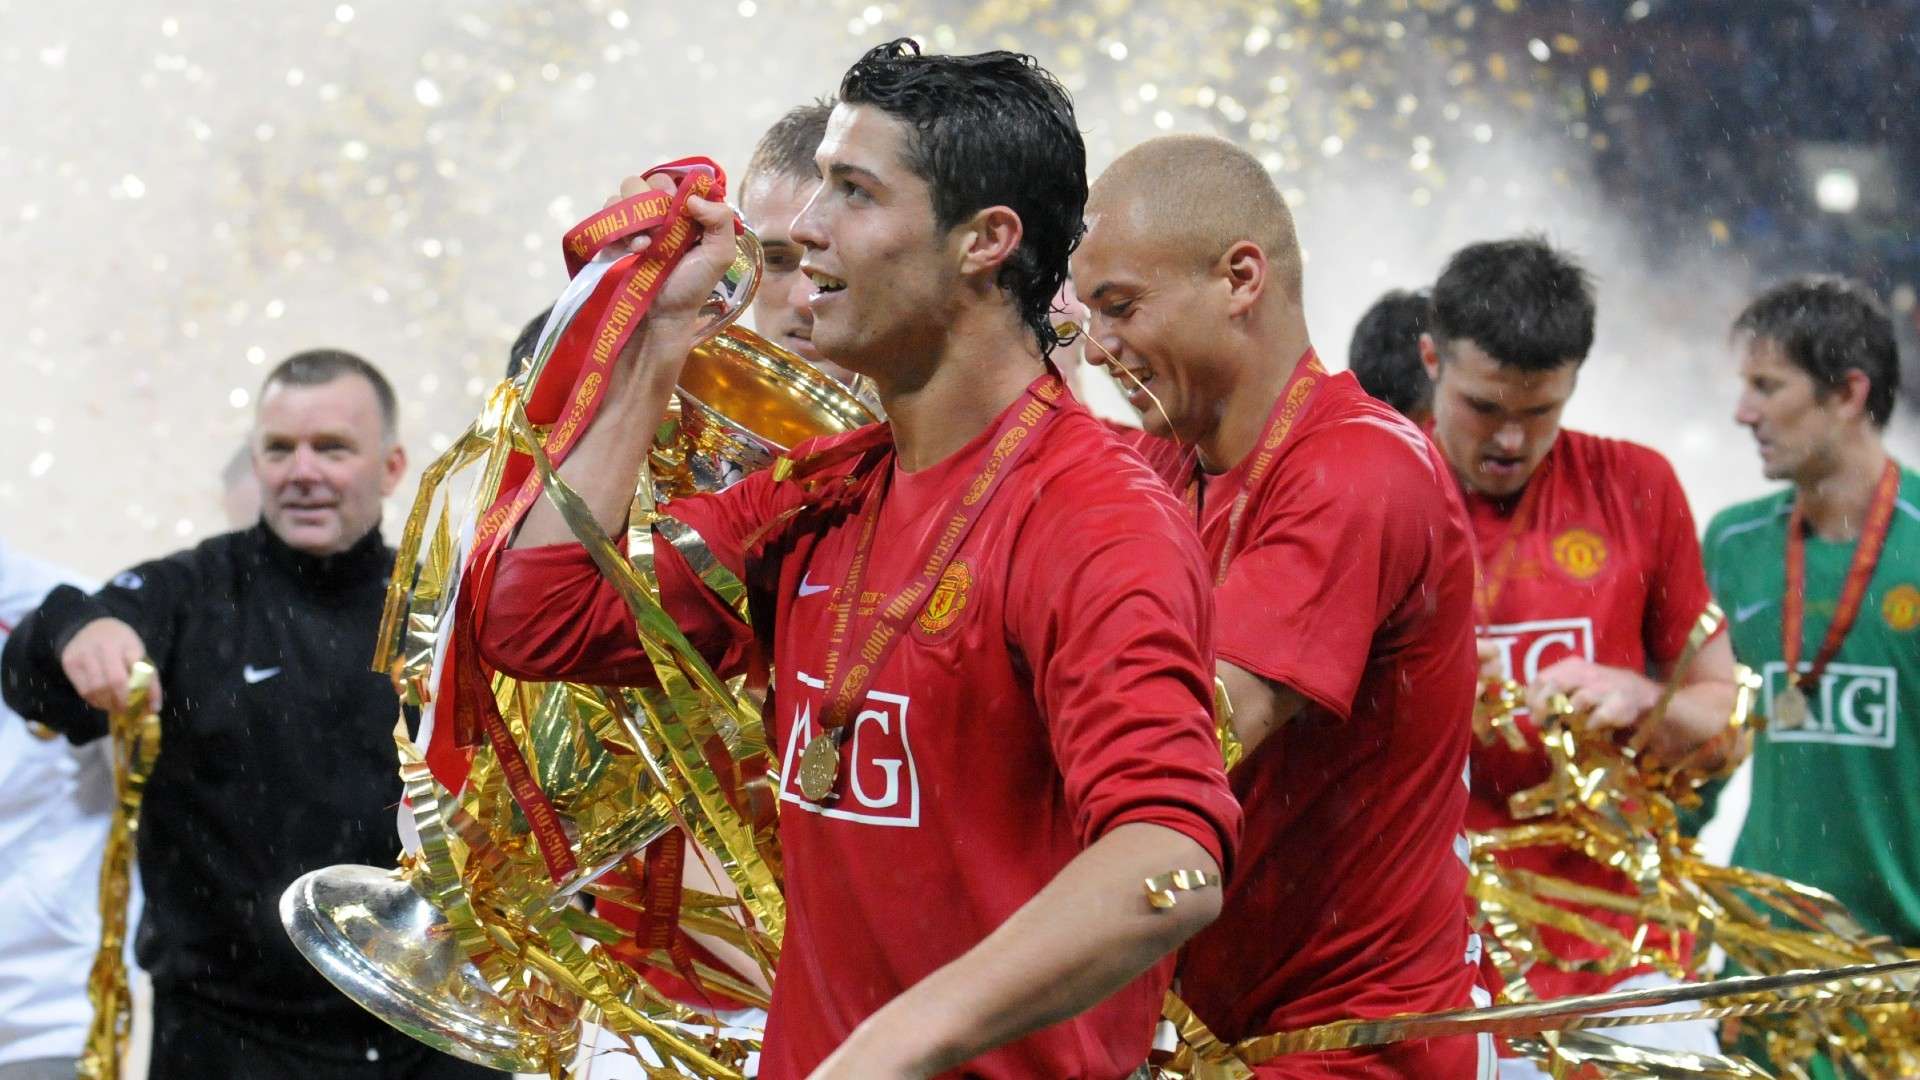 Cristiano Ronaldo Manchester United UCL trophy